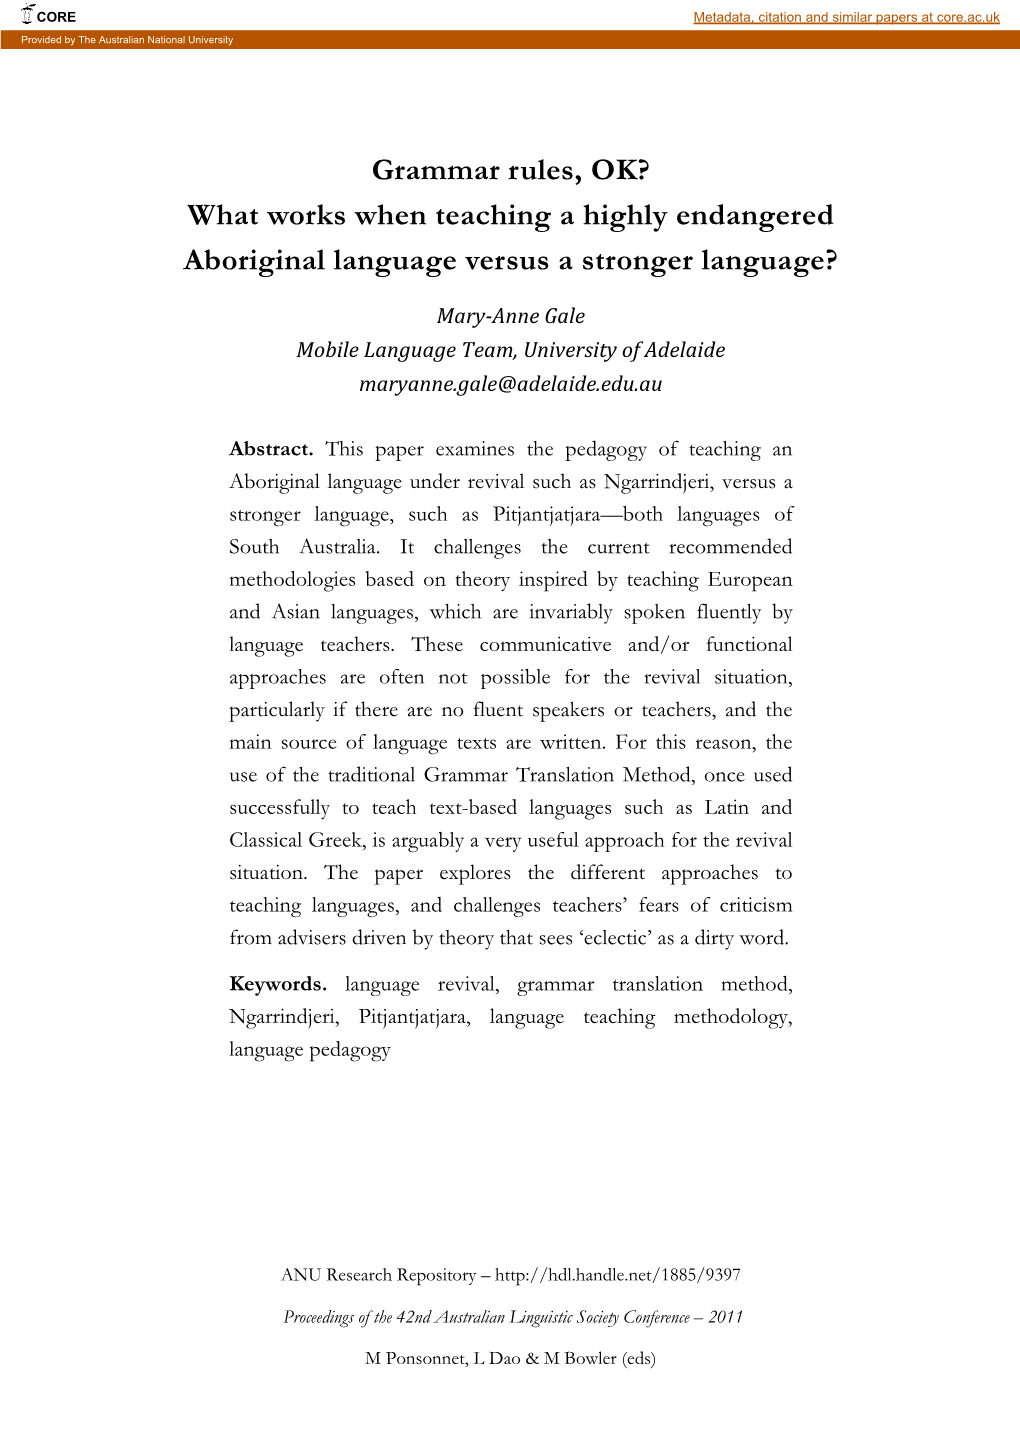 What Works When Teaching a Highly Endangered Aboriginal Language Versus a Stronger Language?